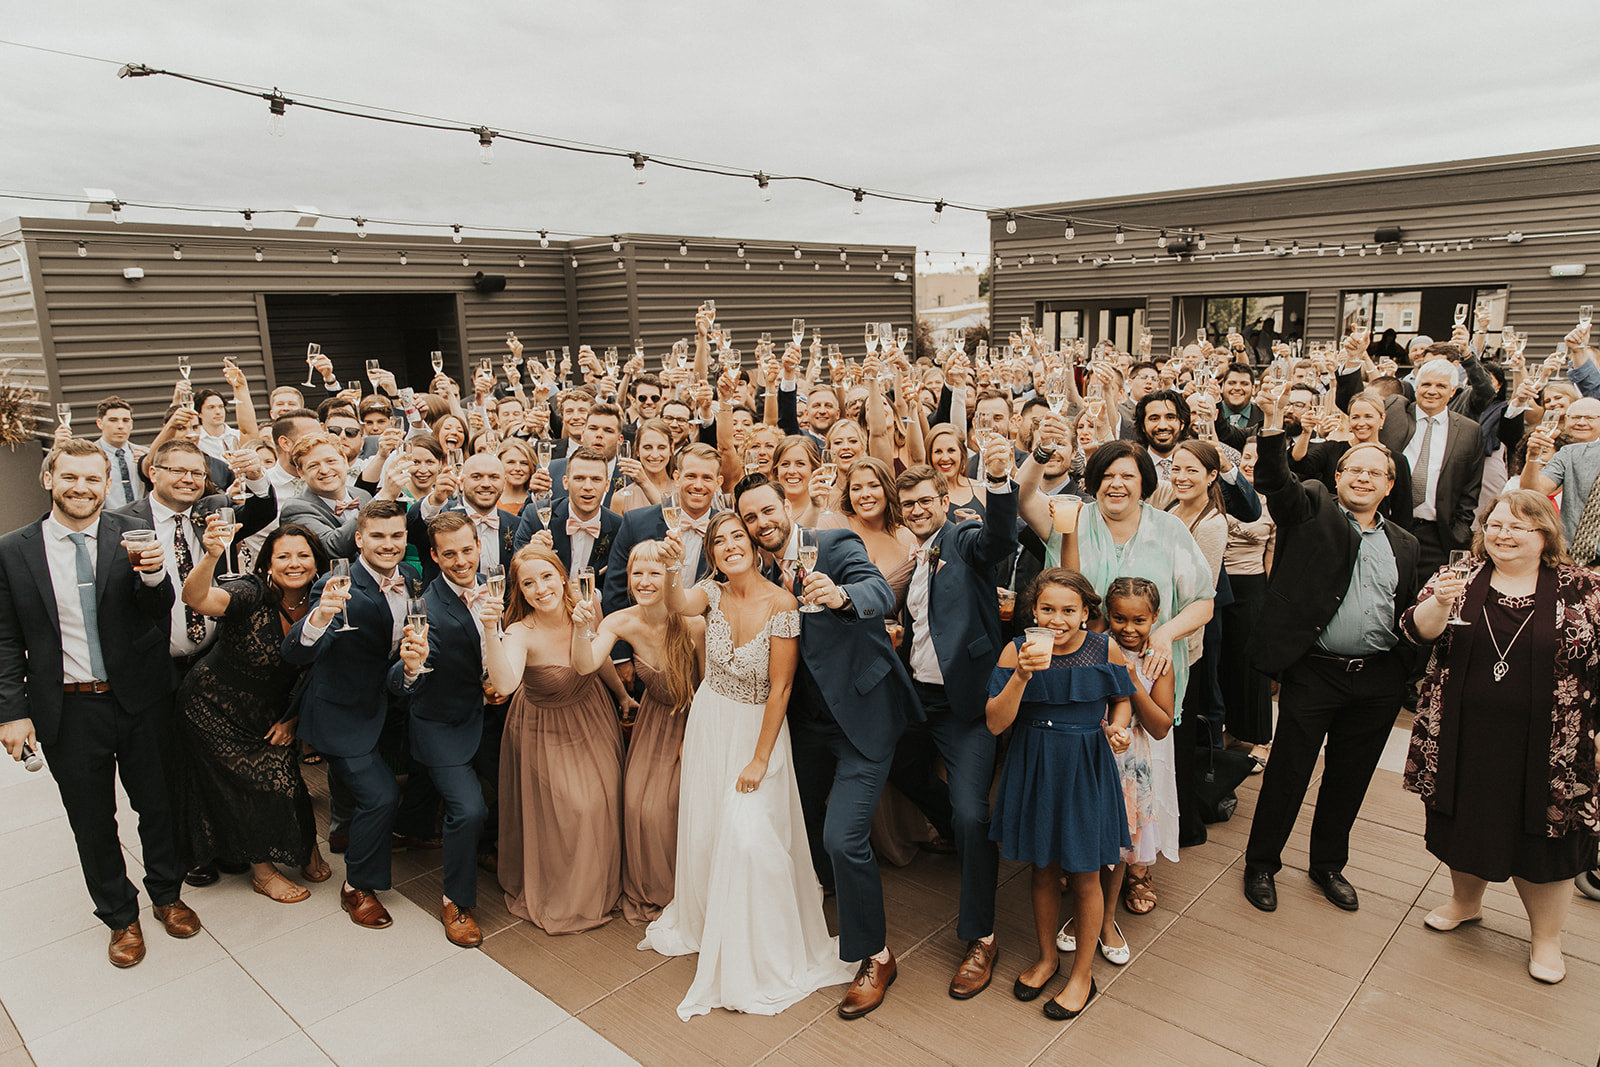 Panoramic shot of a wedding with all the guests toasting